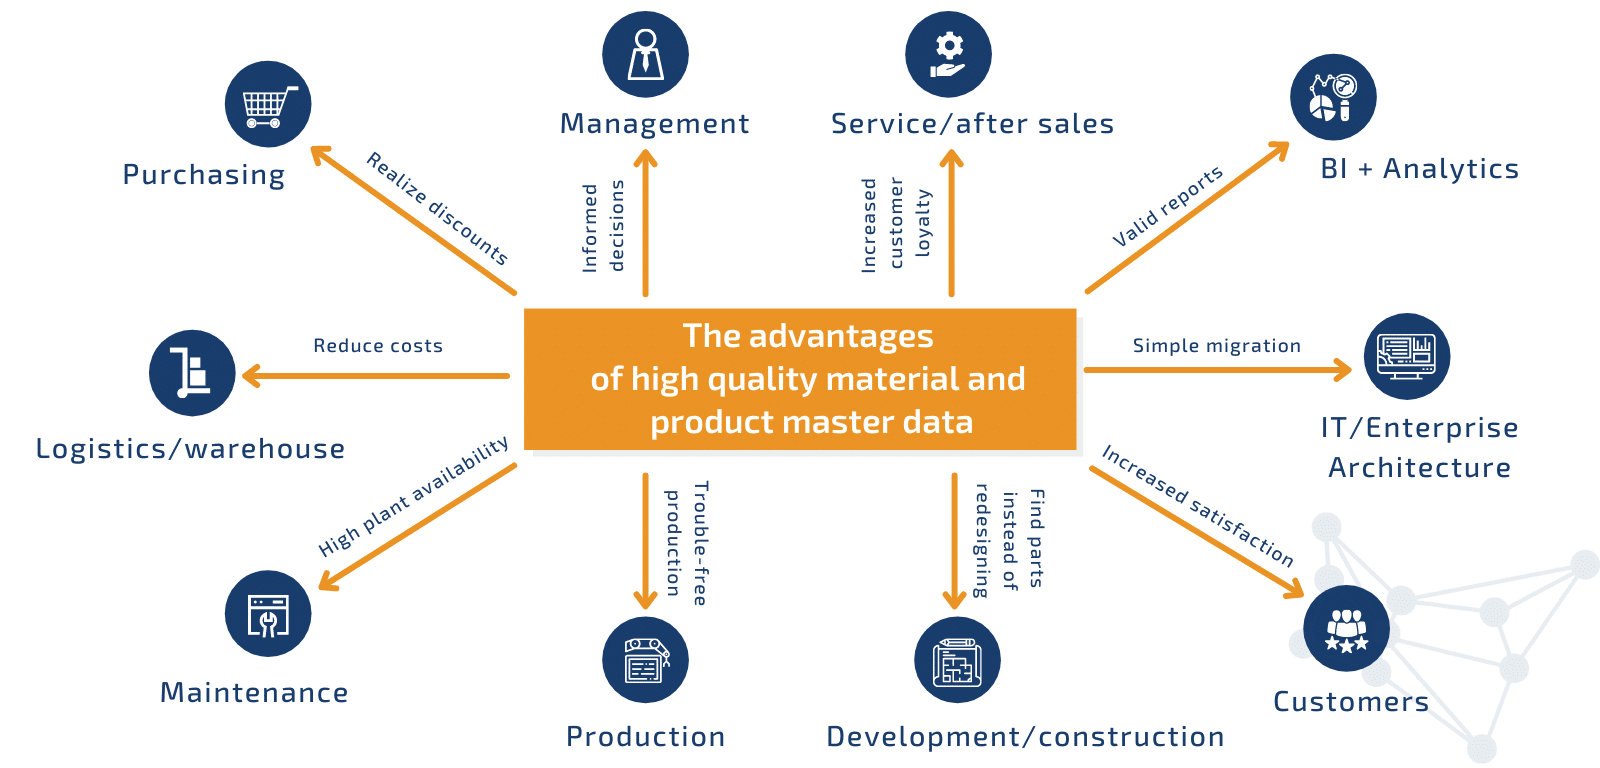 The advantages of high quality material and product master data